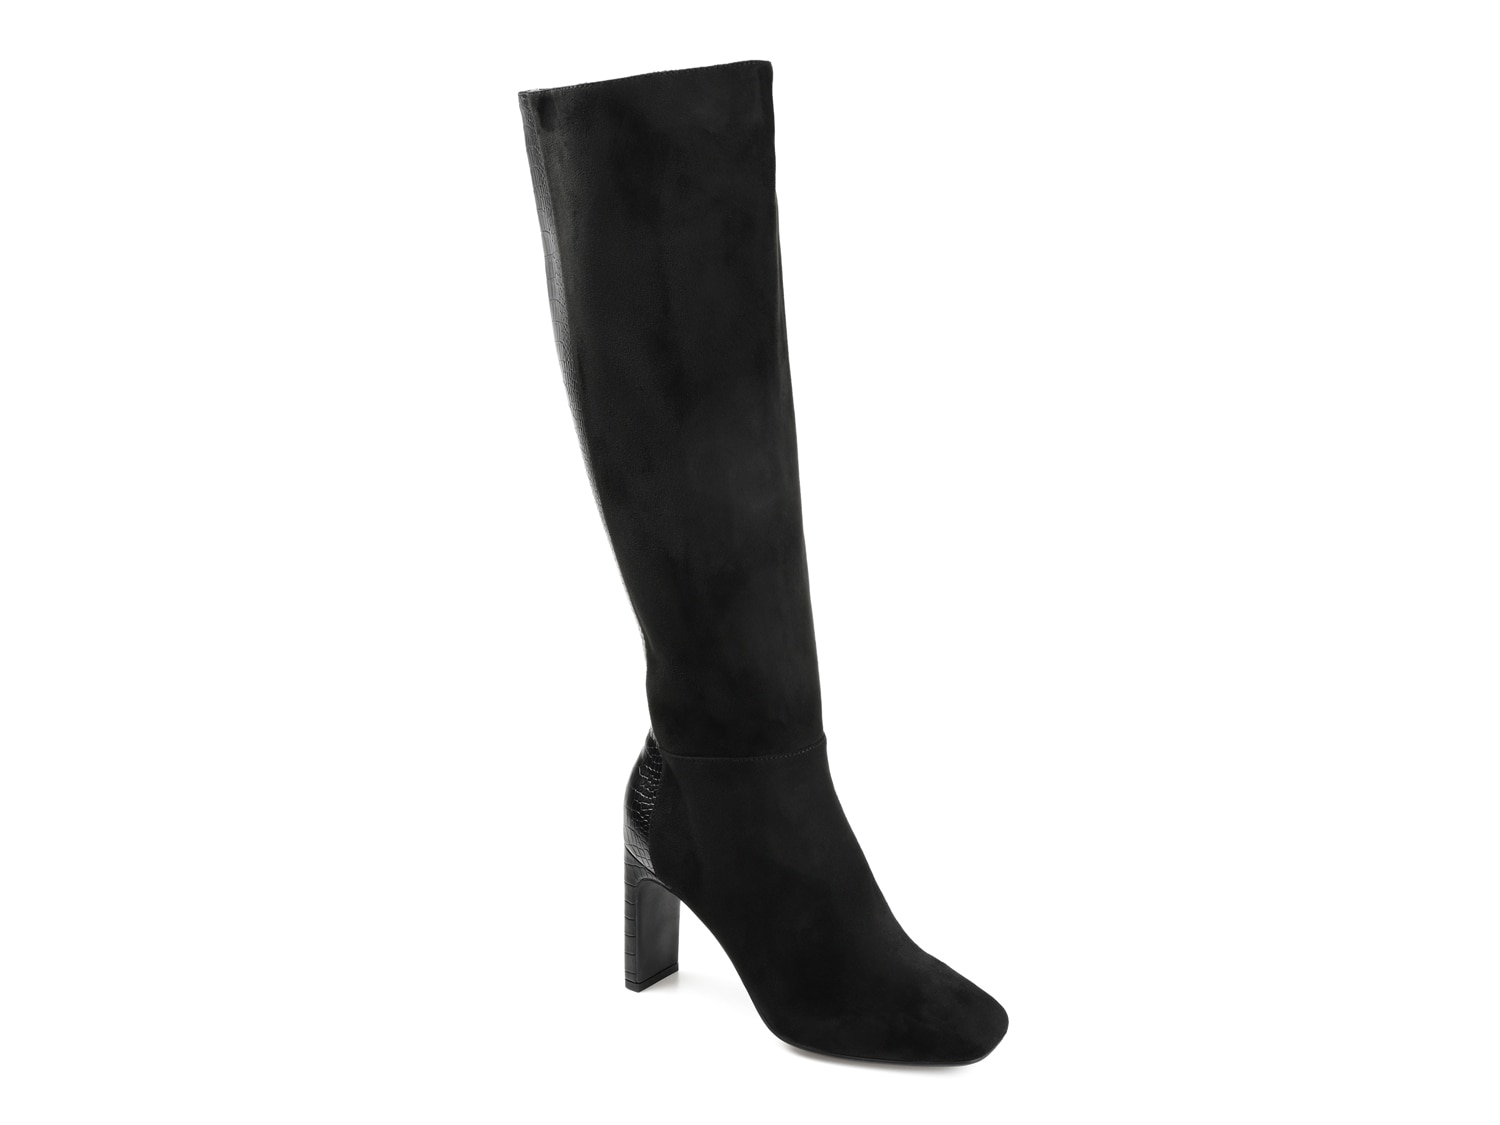 Journee Collection Elisabeth Wide Calf Boot - Free Shipping | DSW